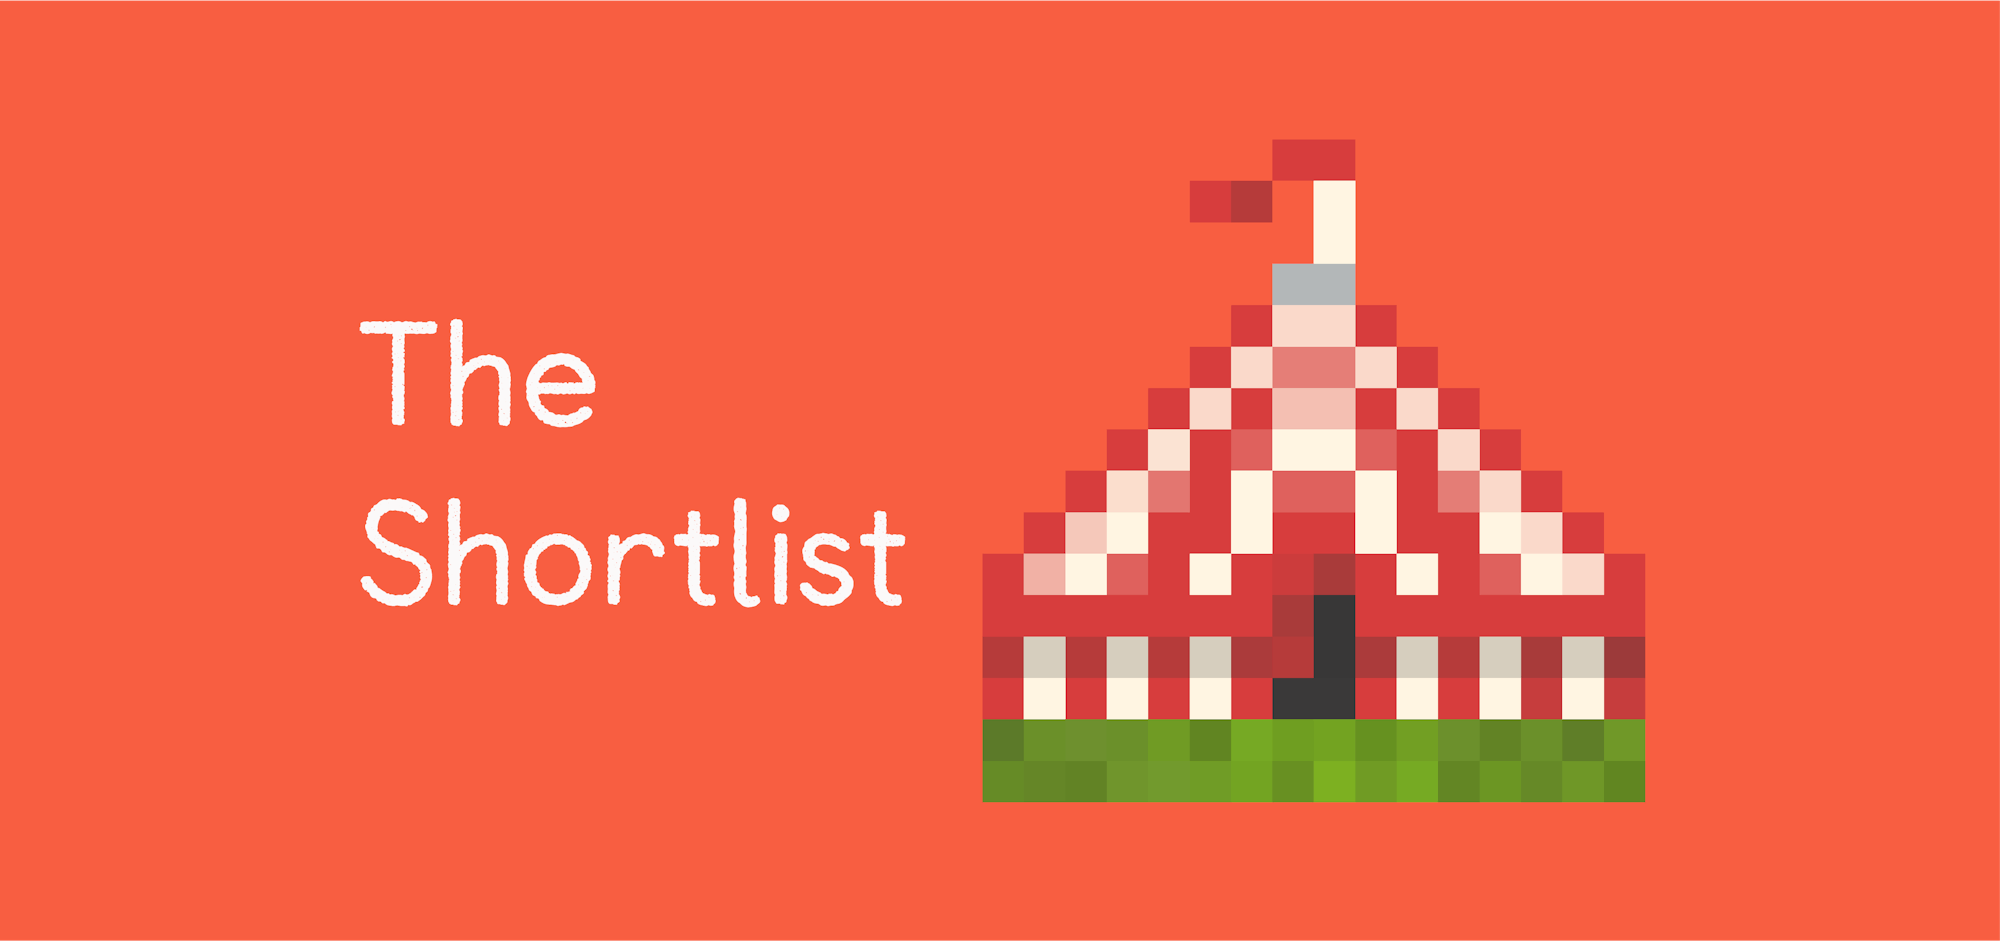 1000x575 the shortlist-02-04.png